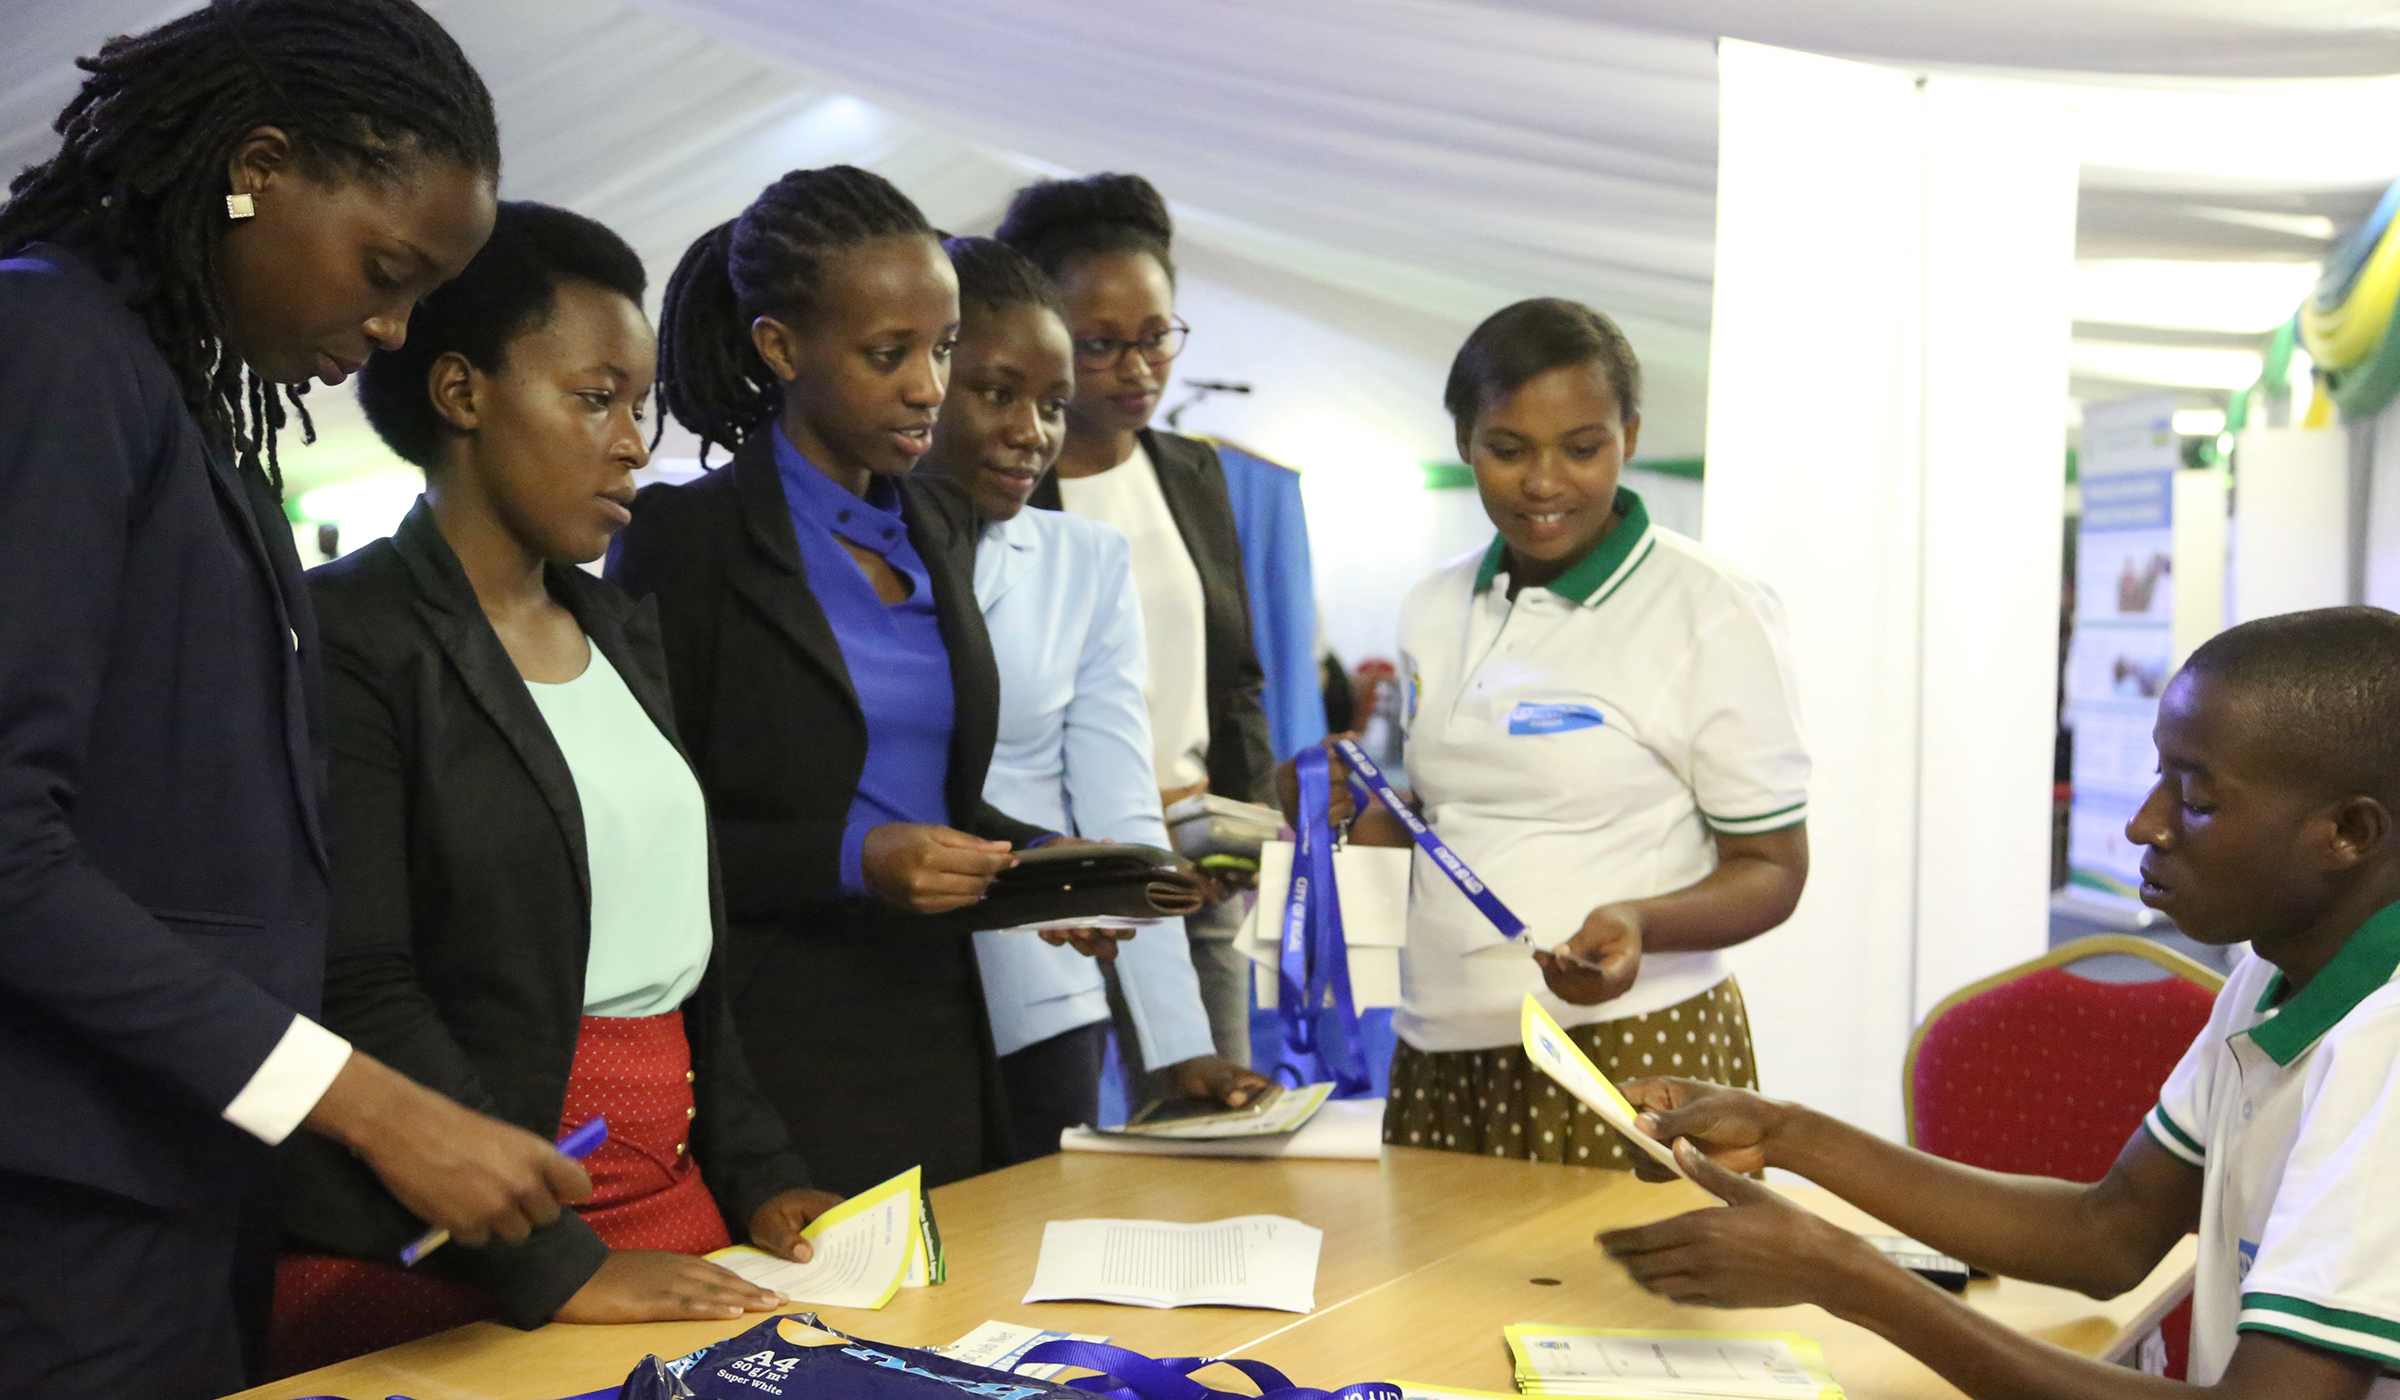 Job seekers interact with a member of staff of the Ministry of Public Service and Labour during Kigali job fair, an event in which job seekers meet with job employers for employment related information or opportunity